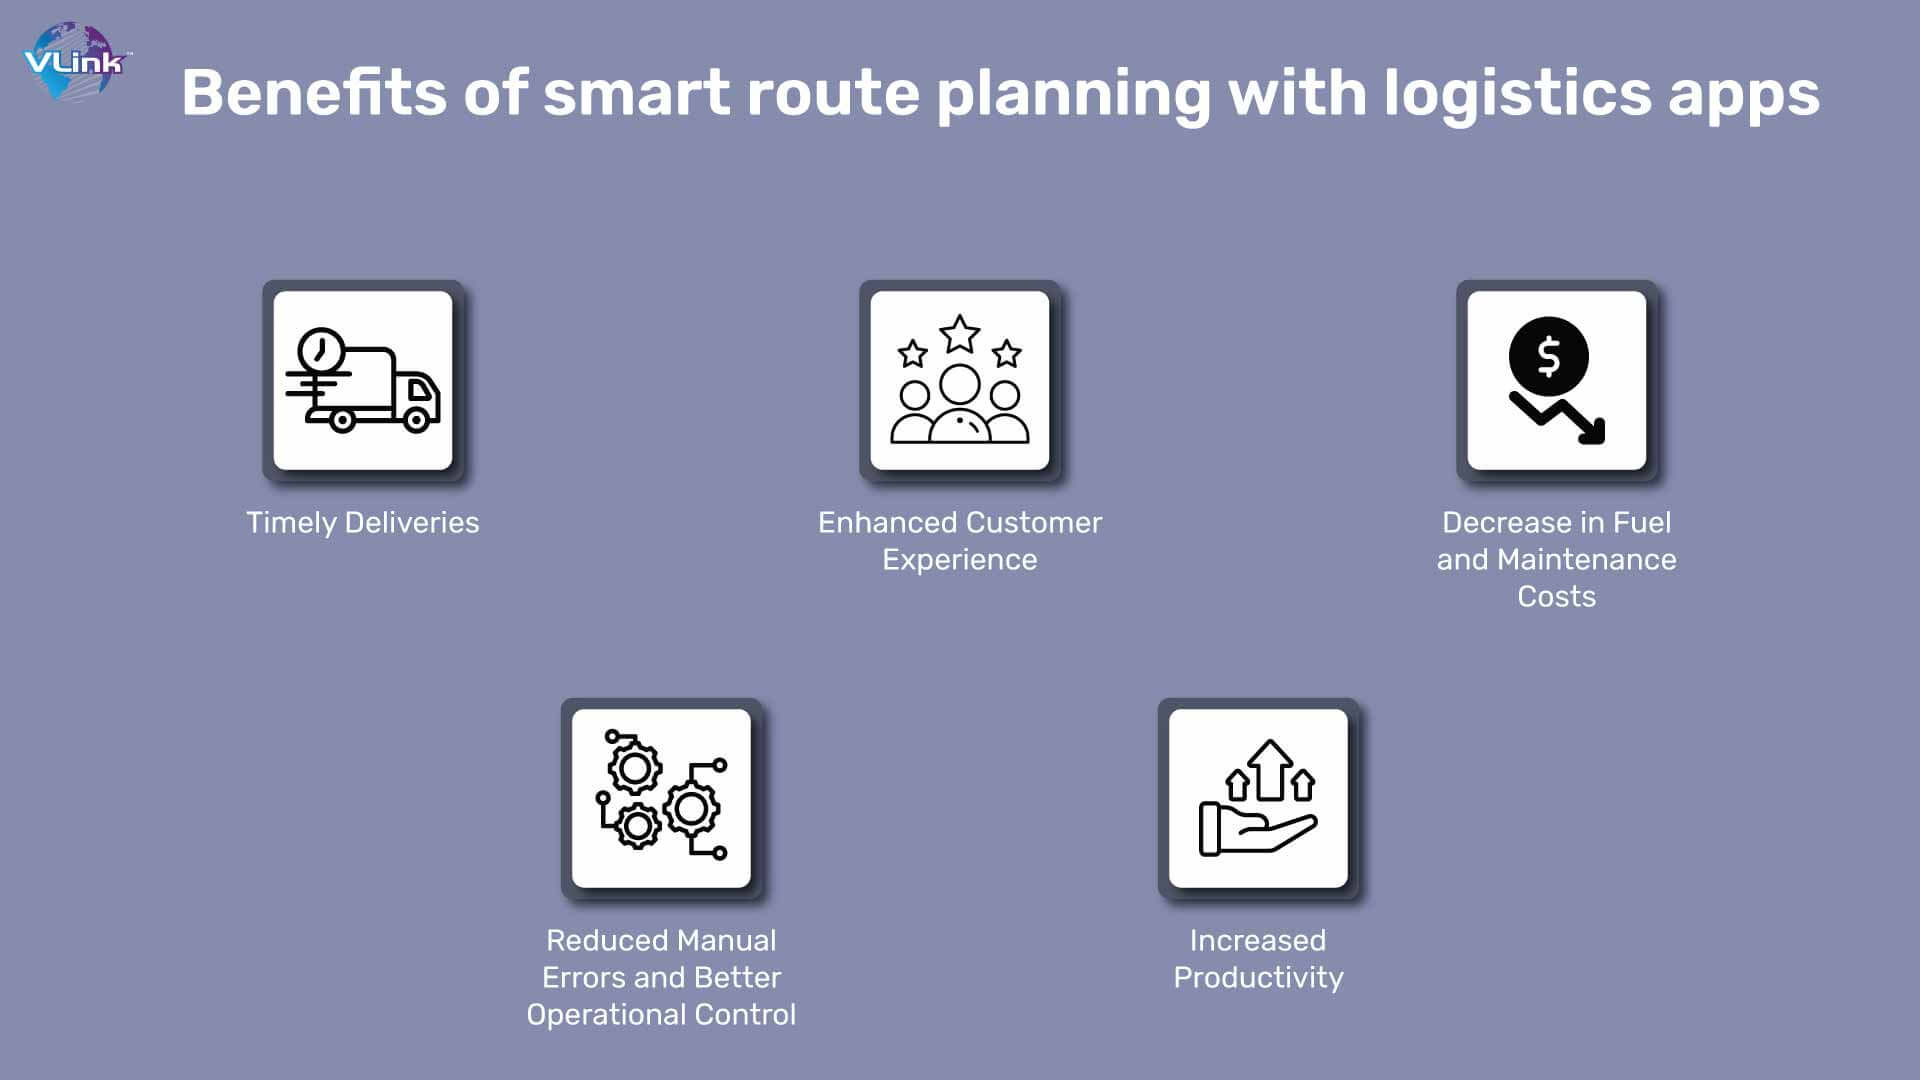 Benefits of smart route planning with logistics apps